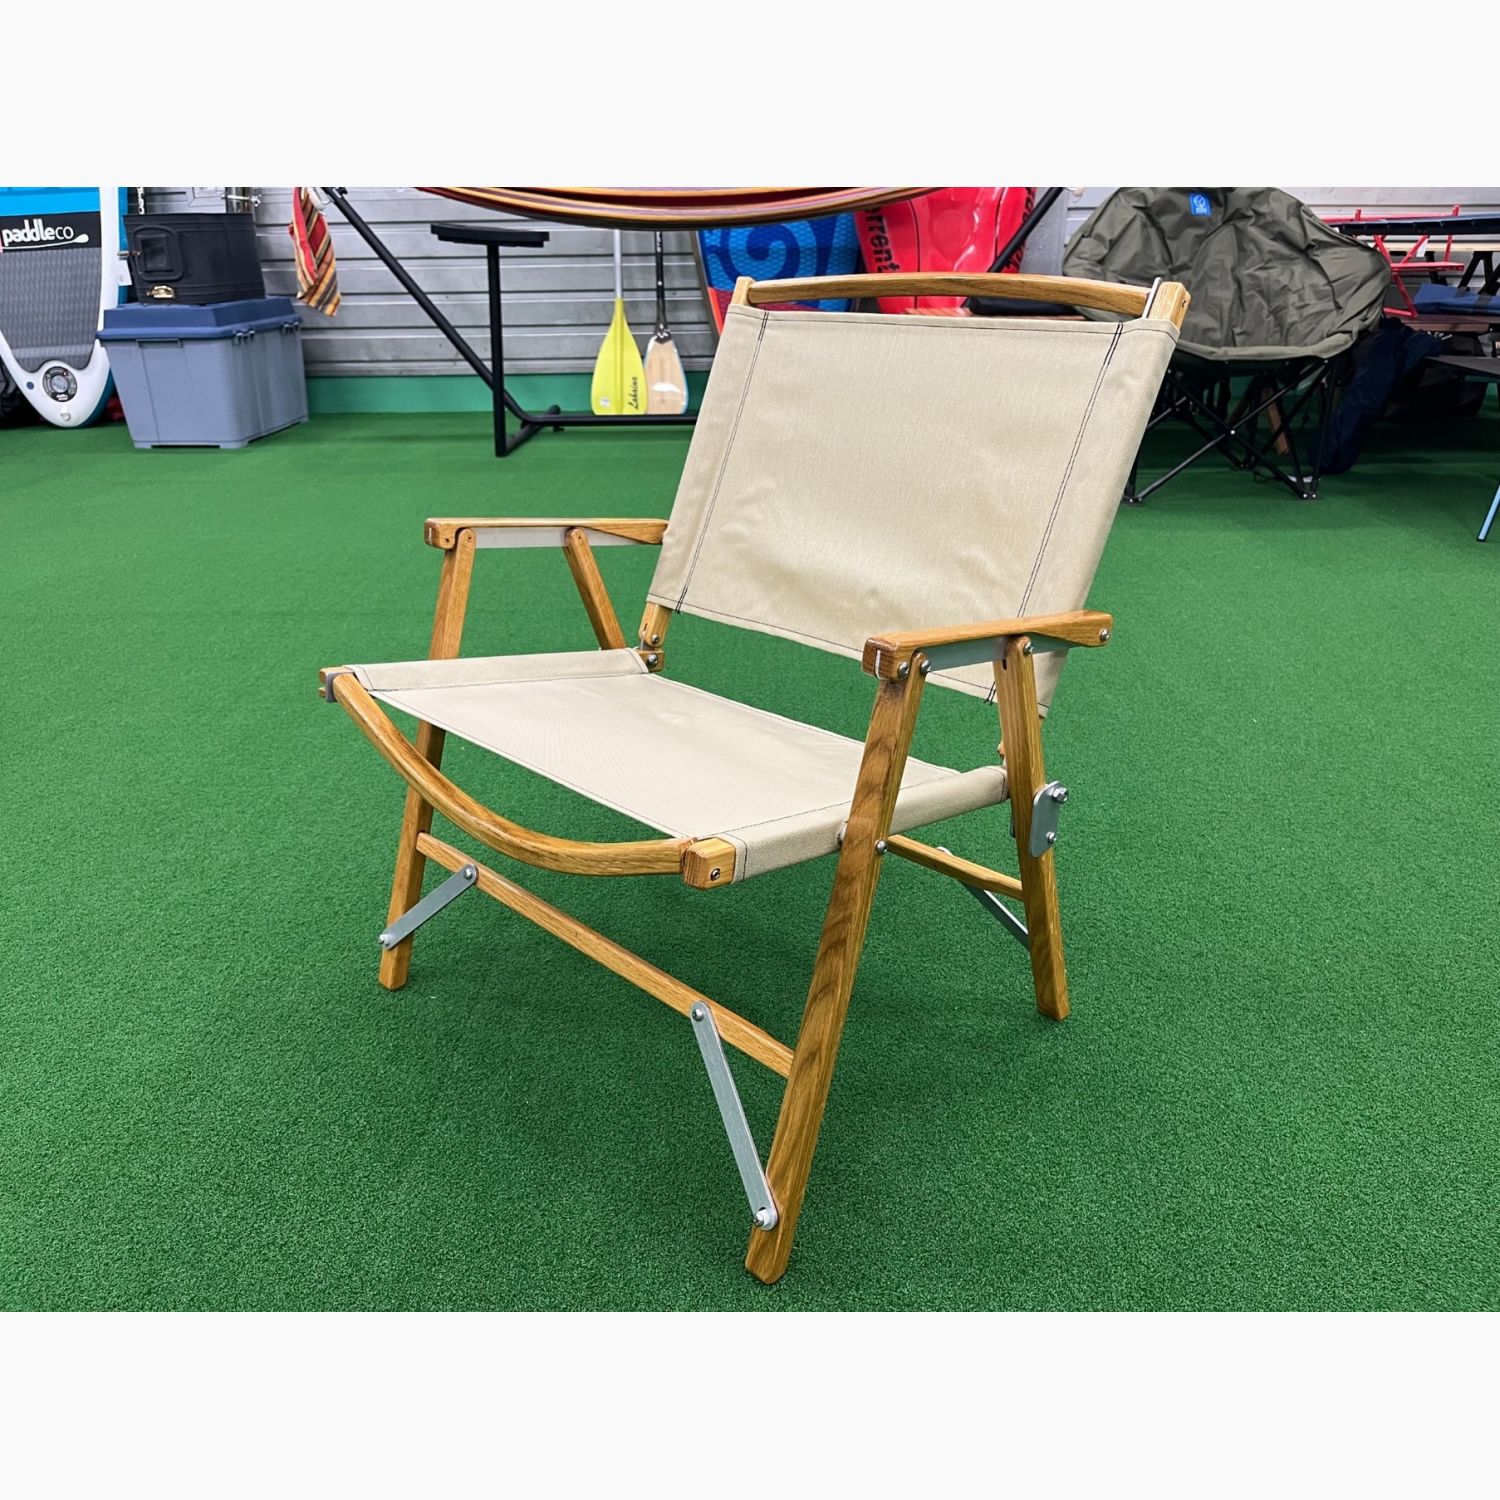 Kermit Chair -FOREST GREEN- カーミットチェア-